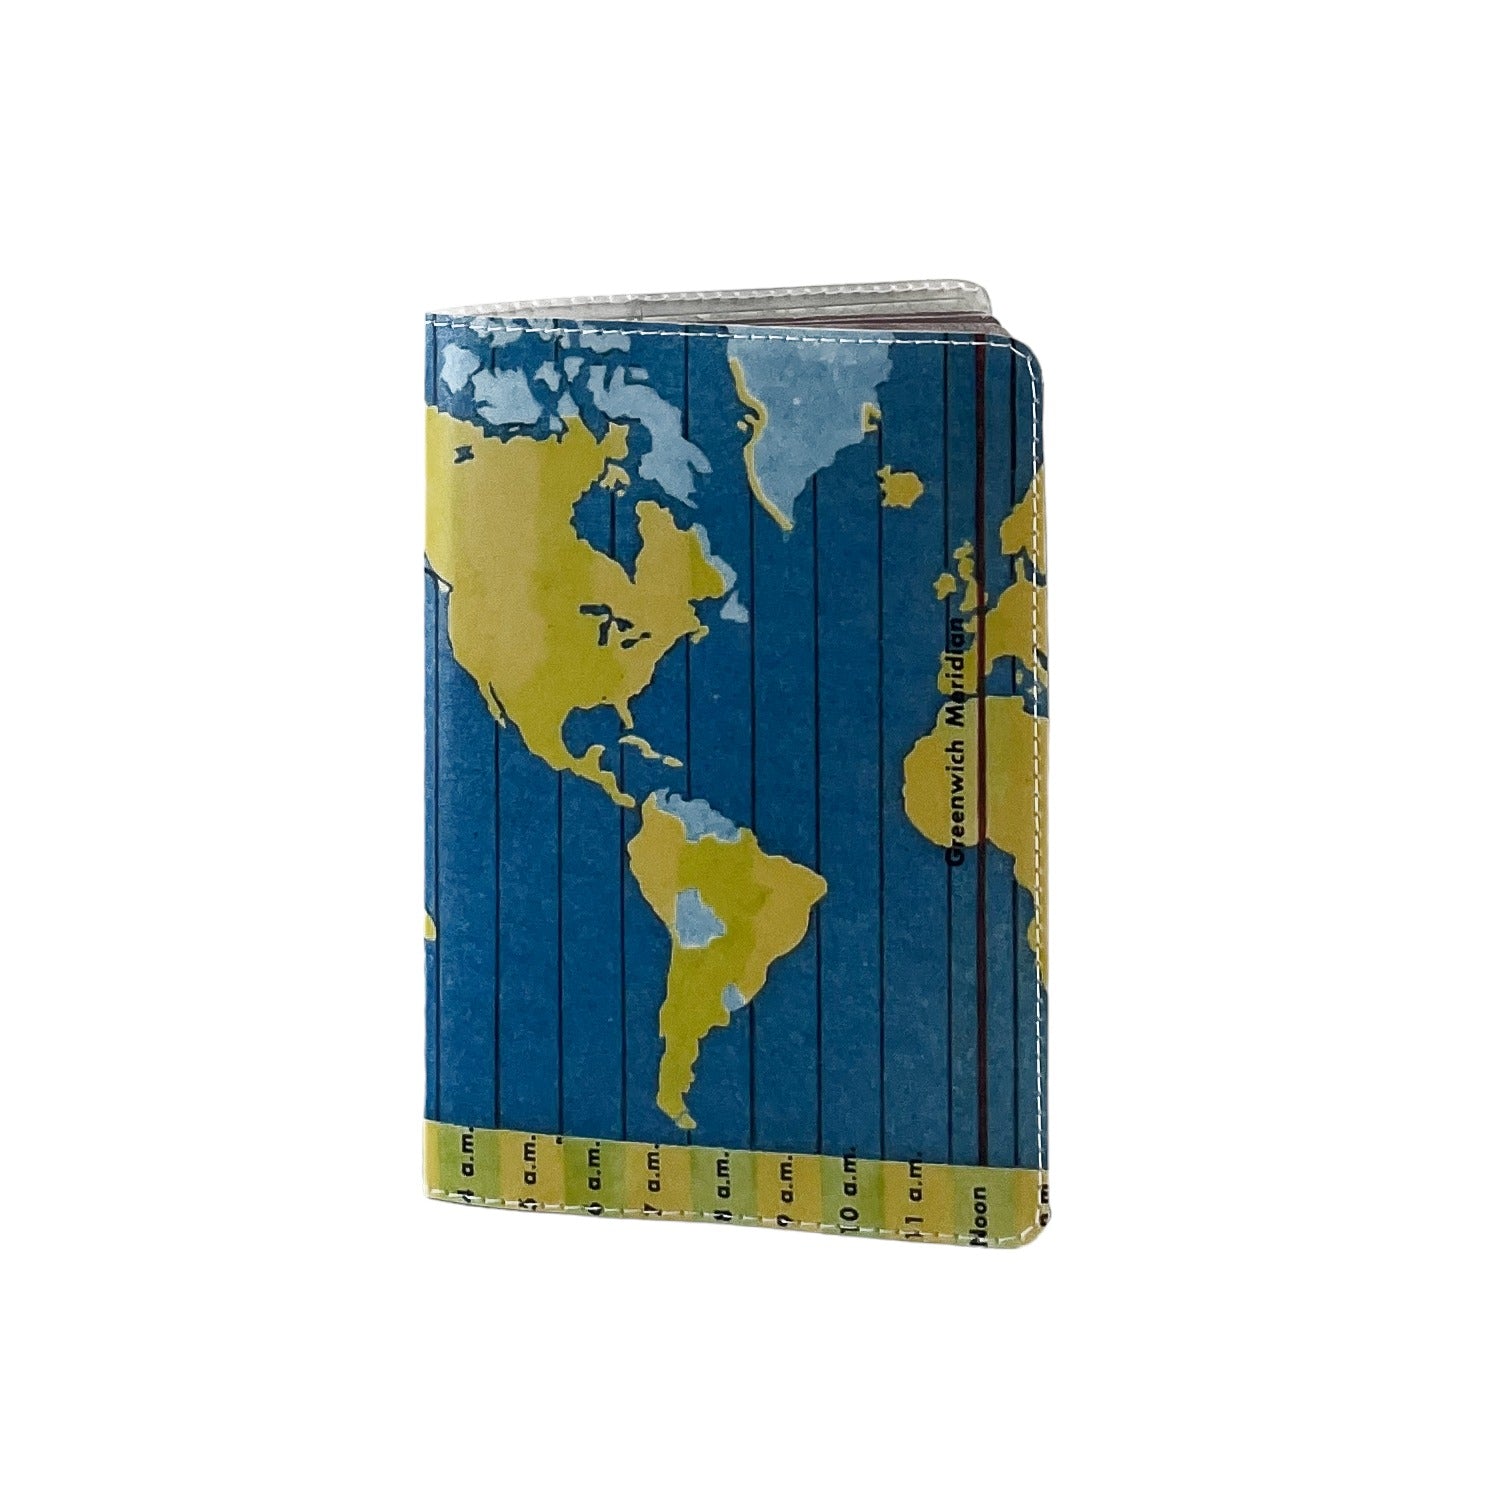 Passport cover with map of the world in yellow and blue